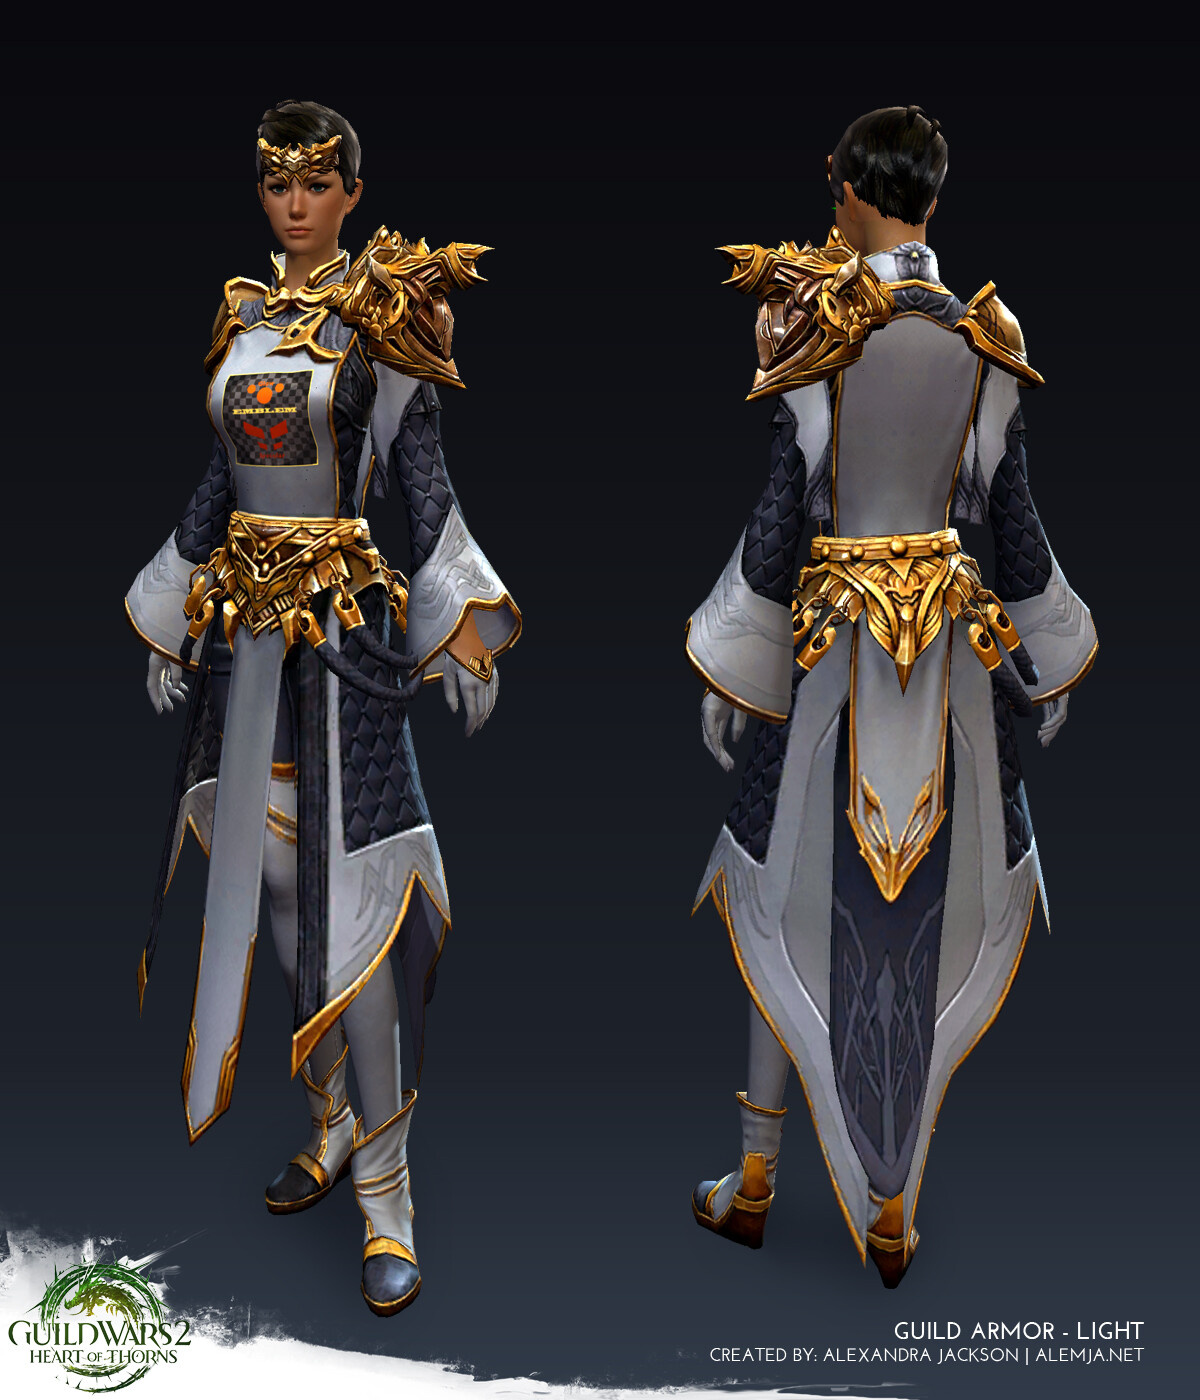 Worked on the armor game ready model and texures. This set was for Guild Wars 2 Heart of Thorns